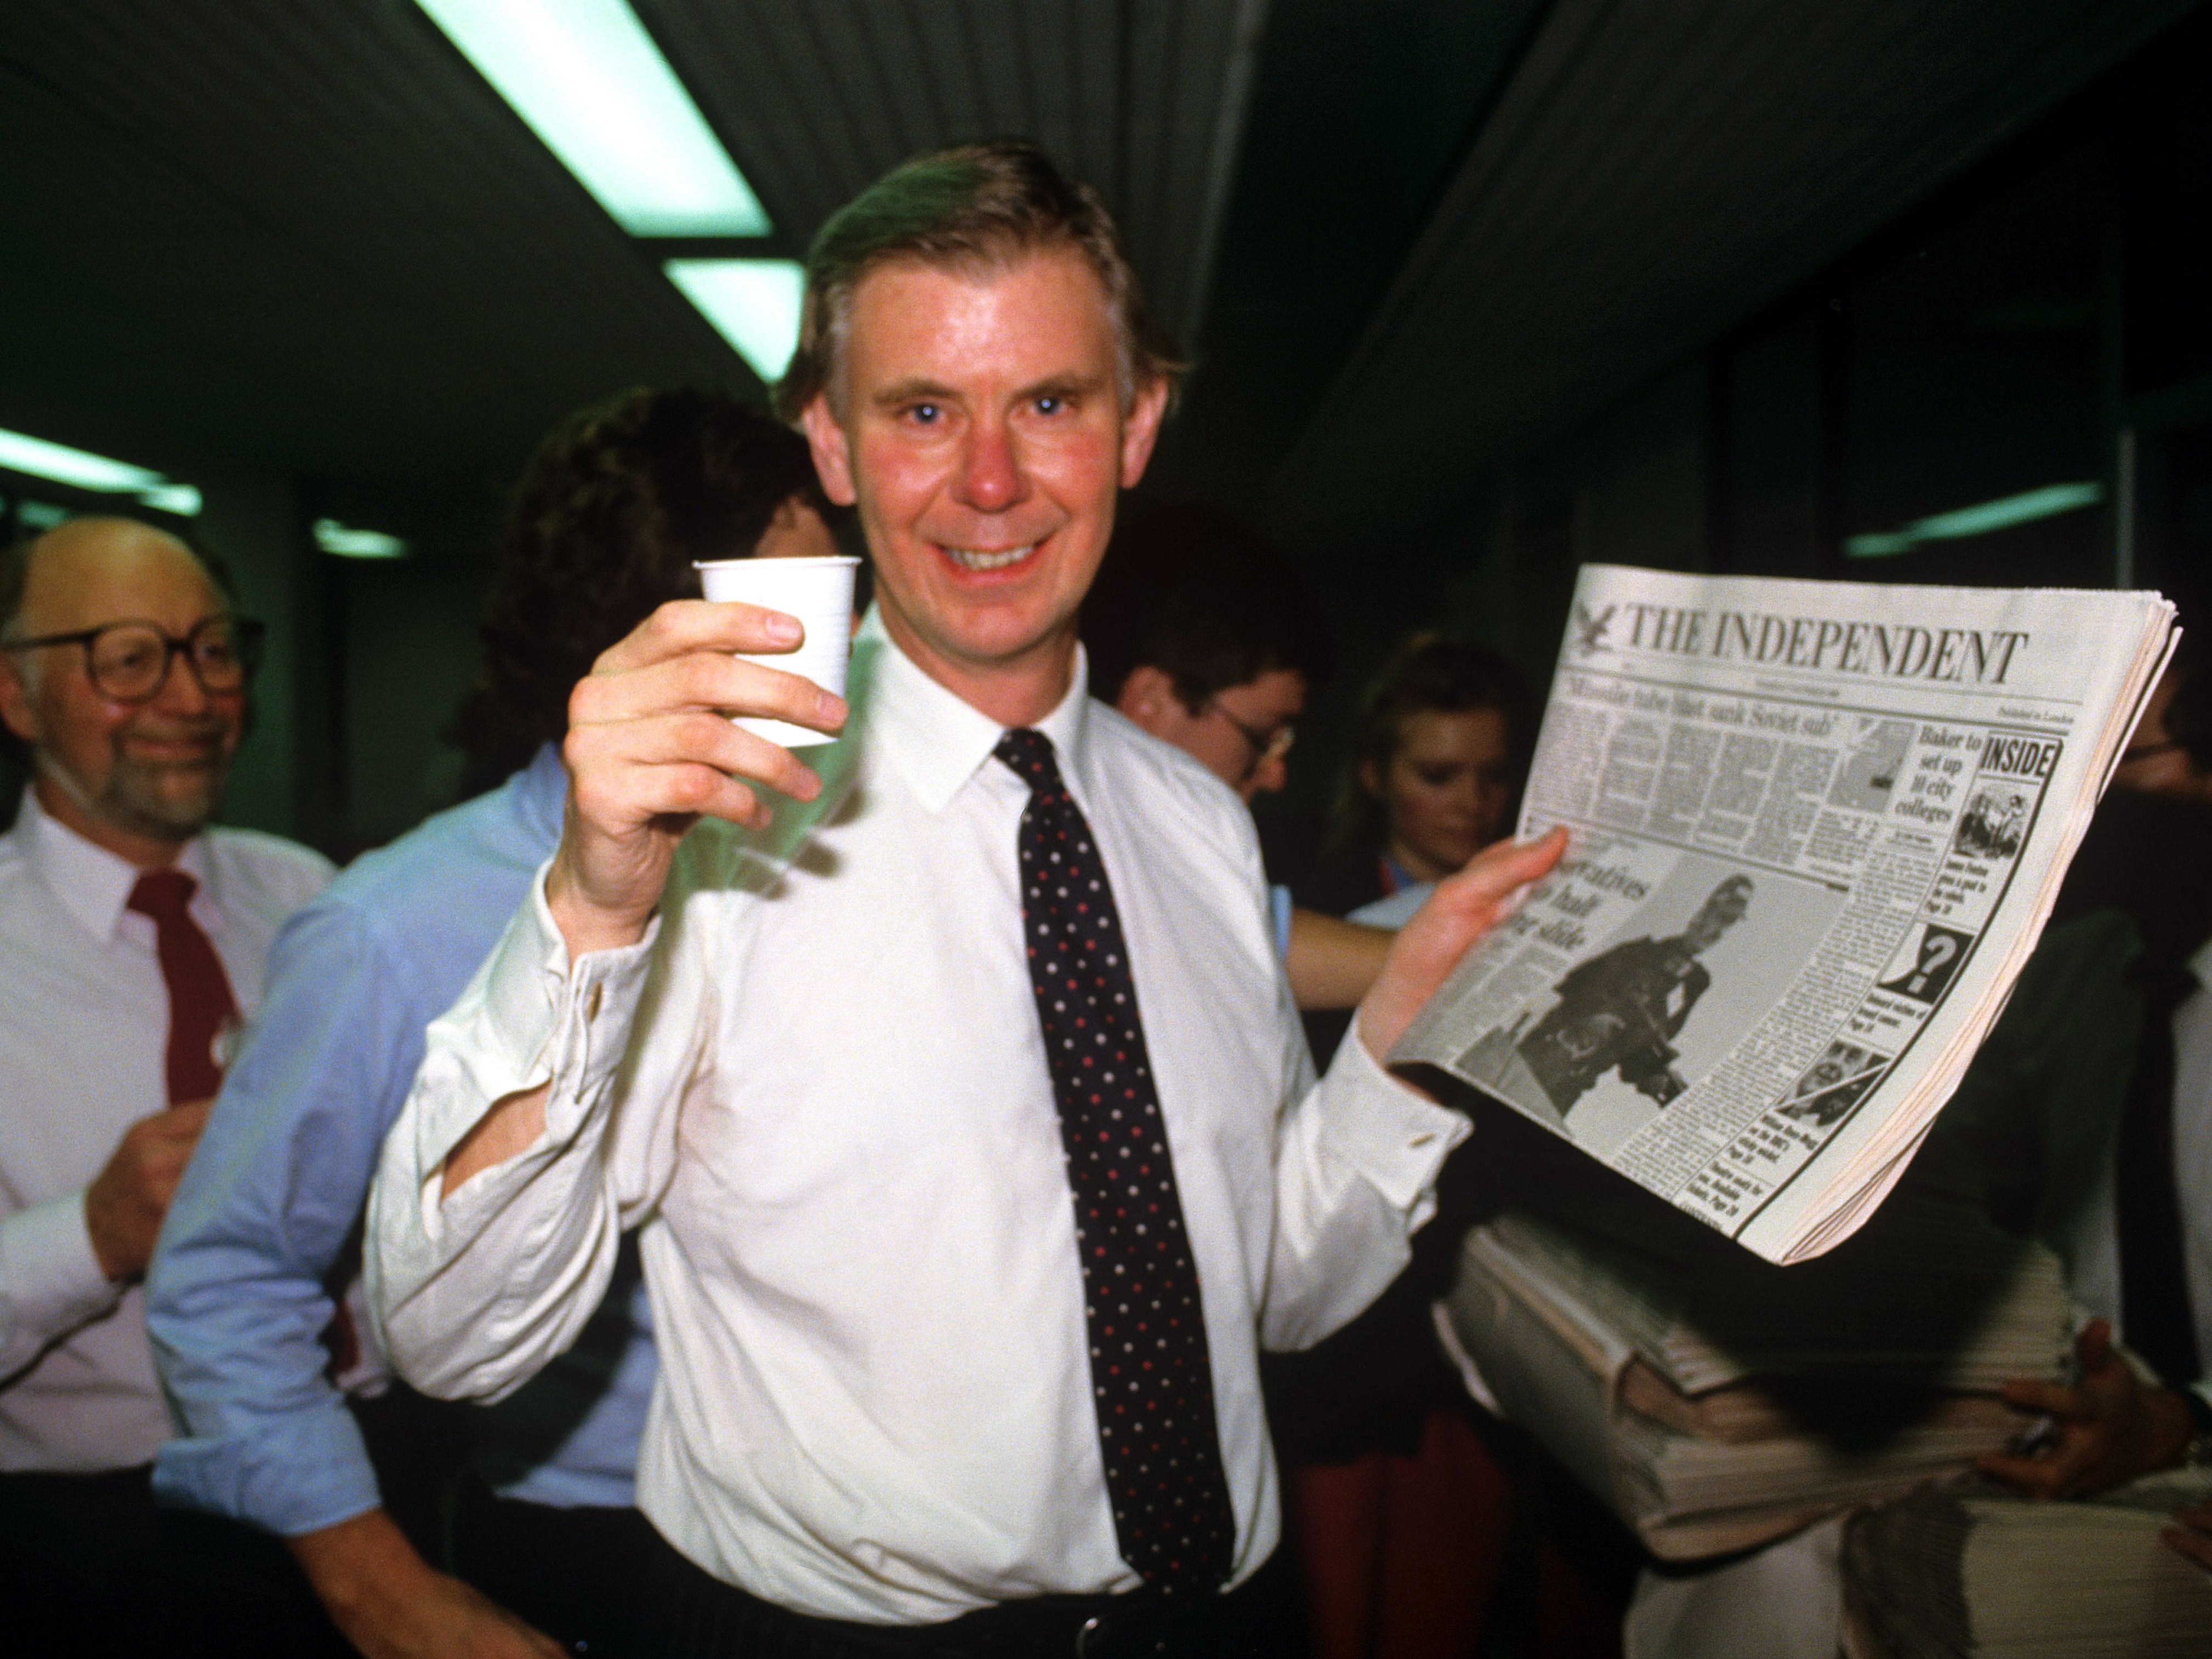 Whittam Smith in the newsroom toasts the first edition on 6 October 1986